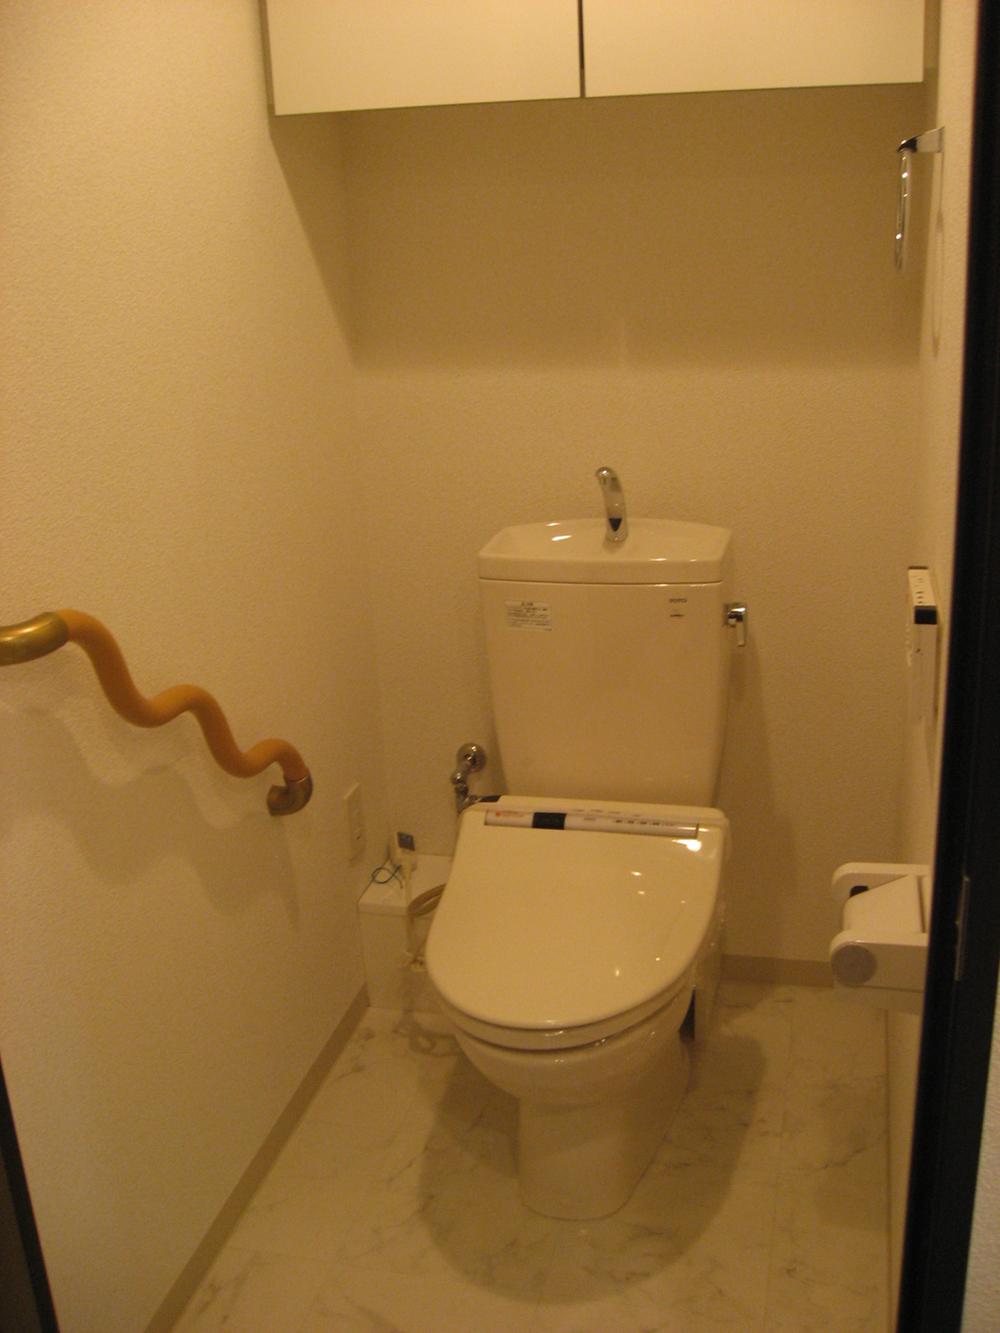 Toilet. Always clean in the shower with toilet. Toilet paper also easy storage in a storage rack with